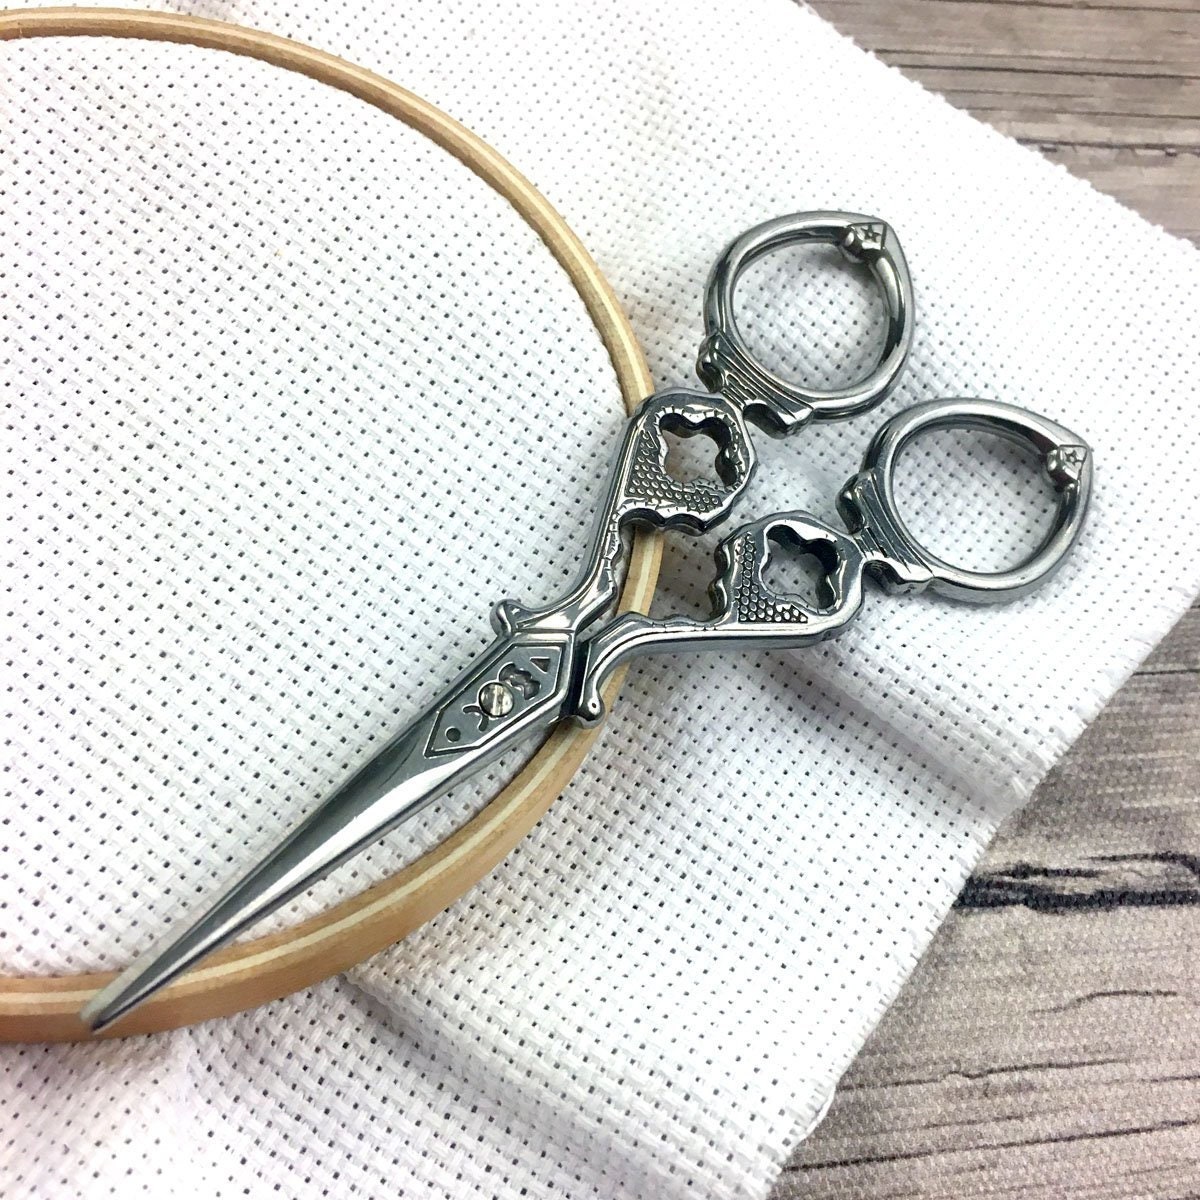 Sewing Embroidery Scissors, 3.5in Embroidery Scissors Crafting Threading  Scissors Cross Stitch Scissors Stainless Steel Small Craft Scissors for